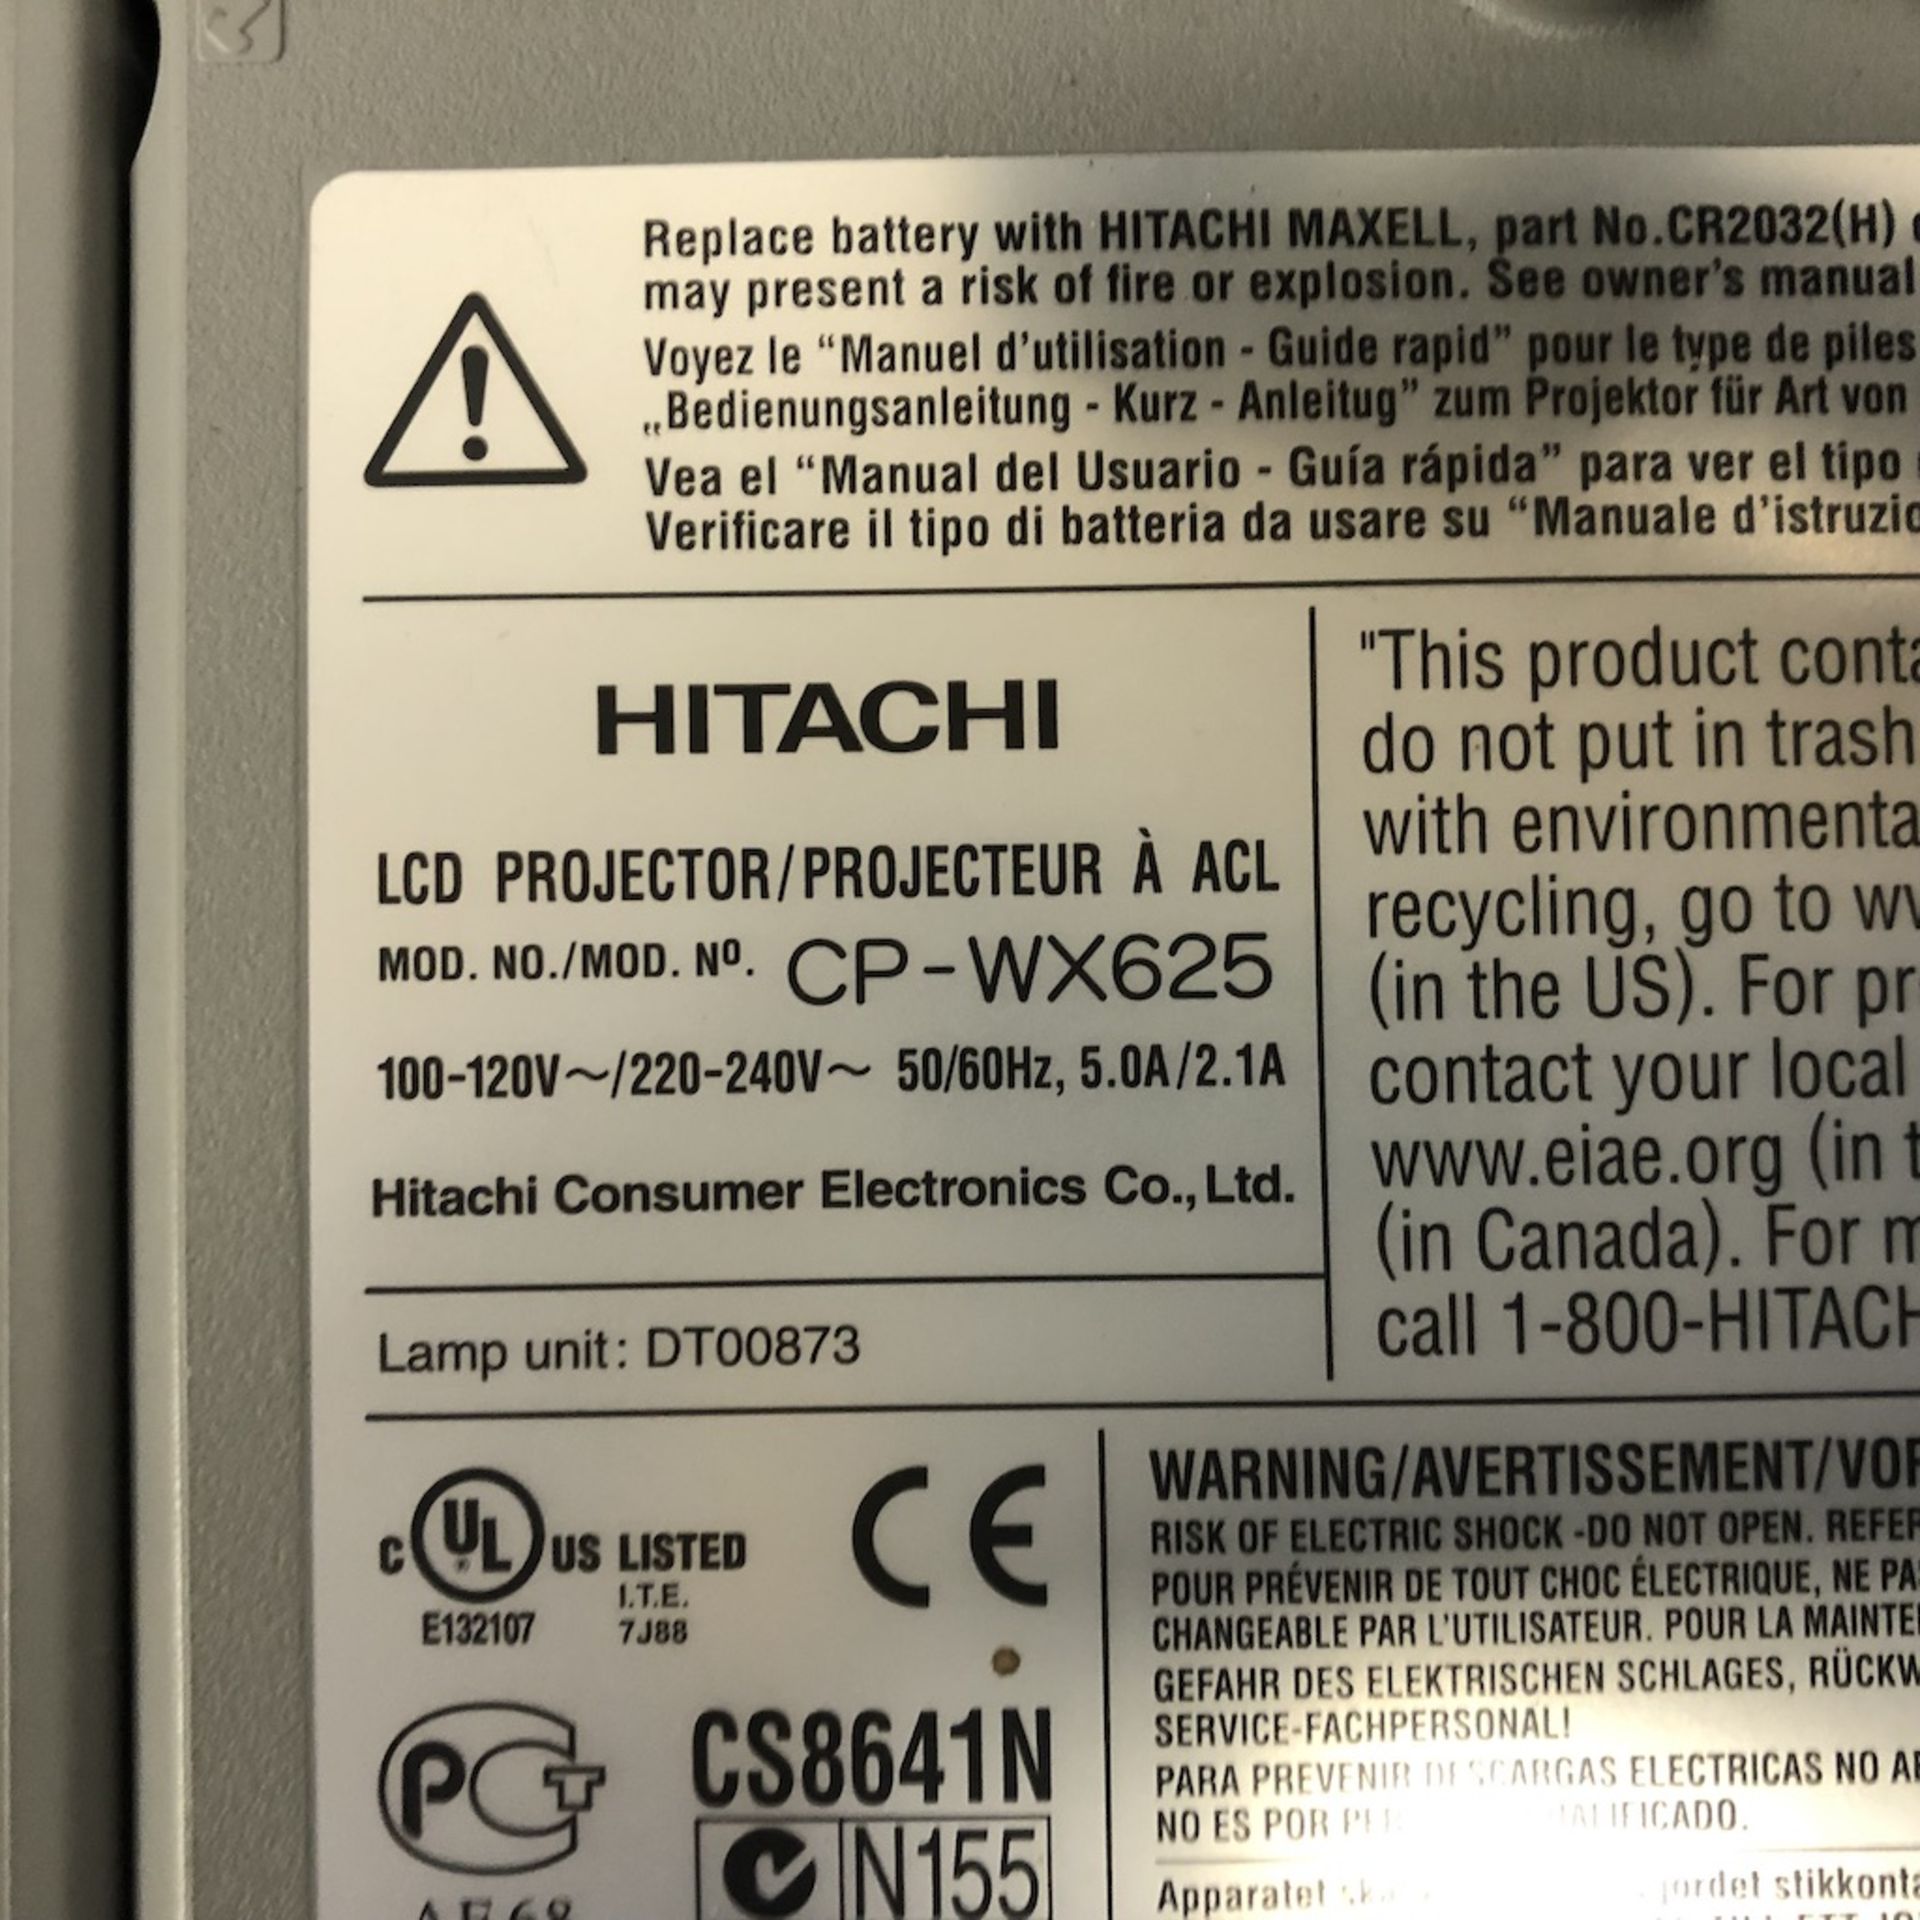 HITACHI CP-WX625 MULTIMEDIA LCD PROJECTOR - Image 10 of 11